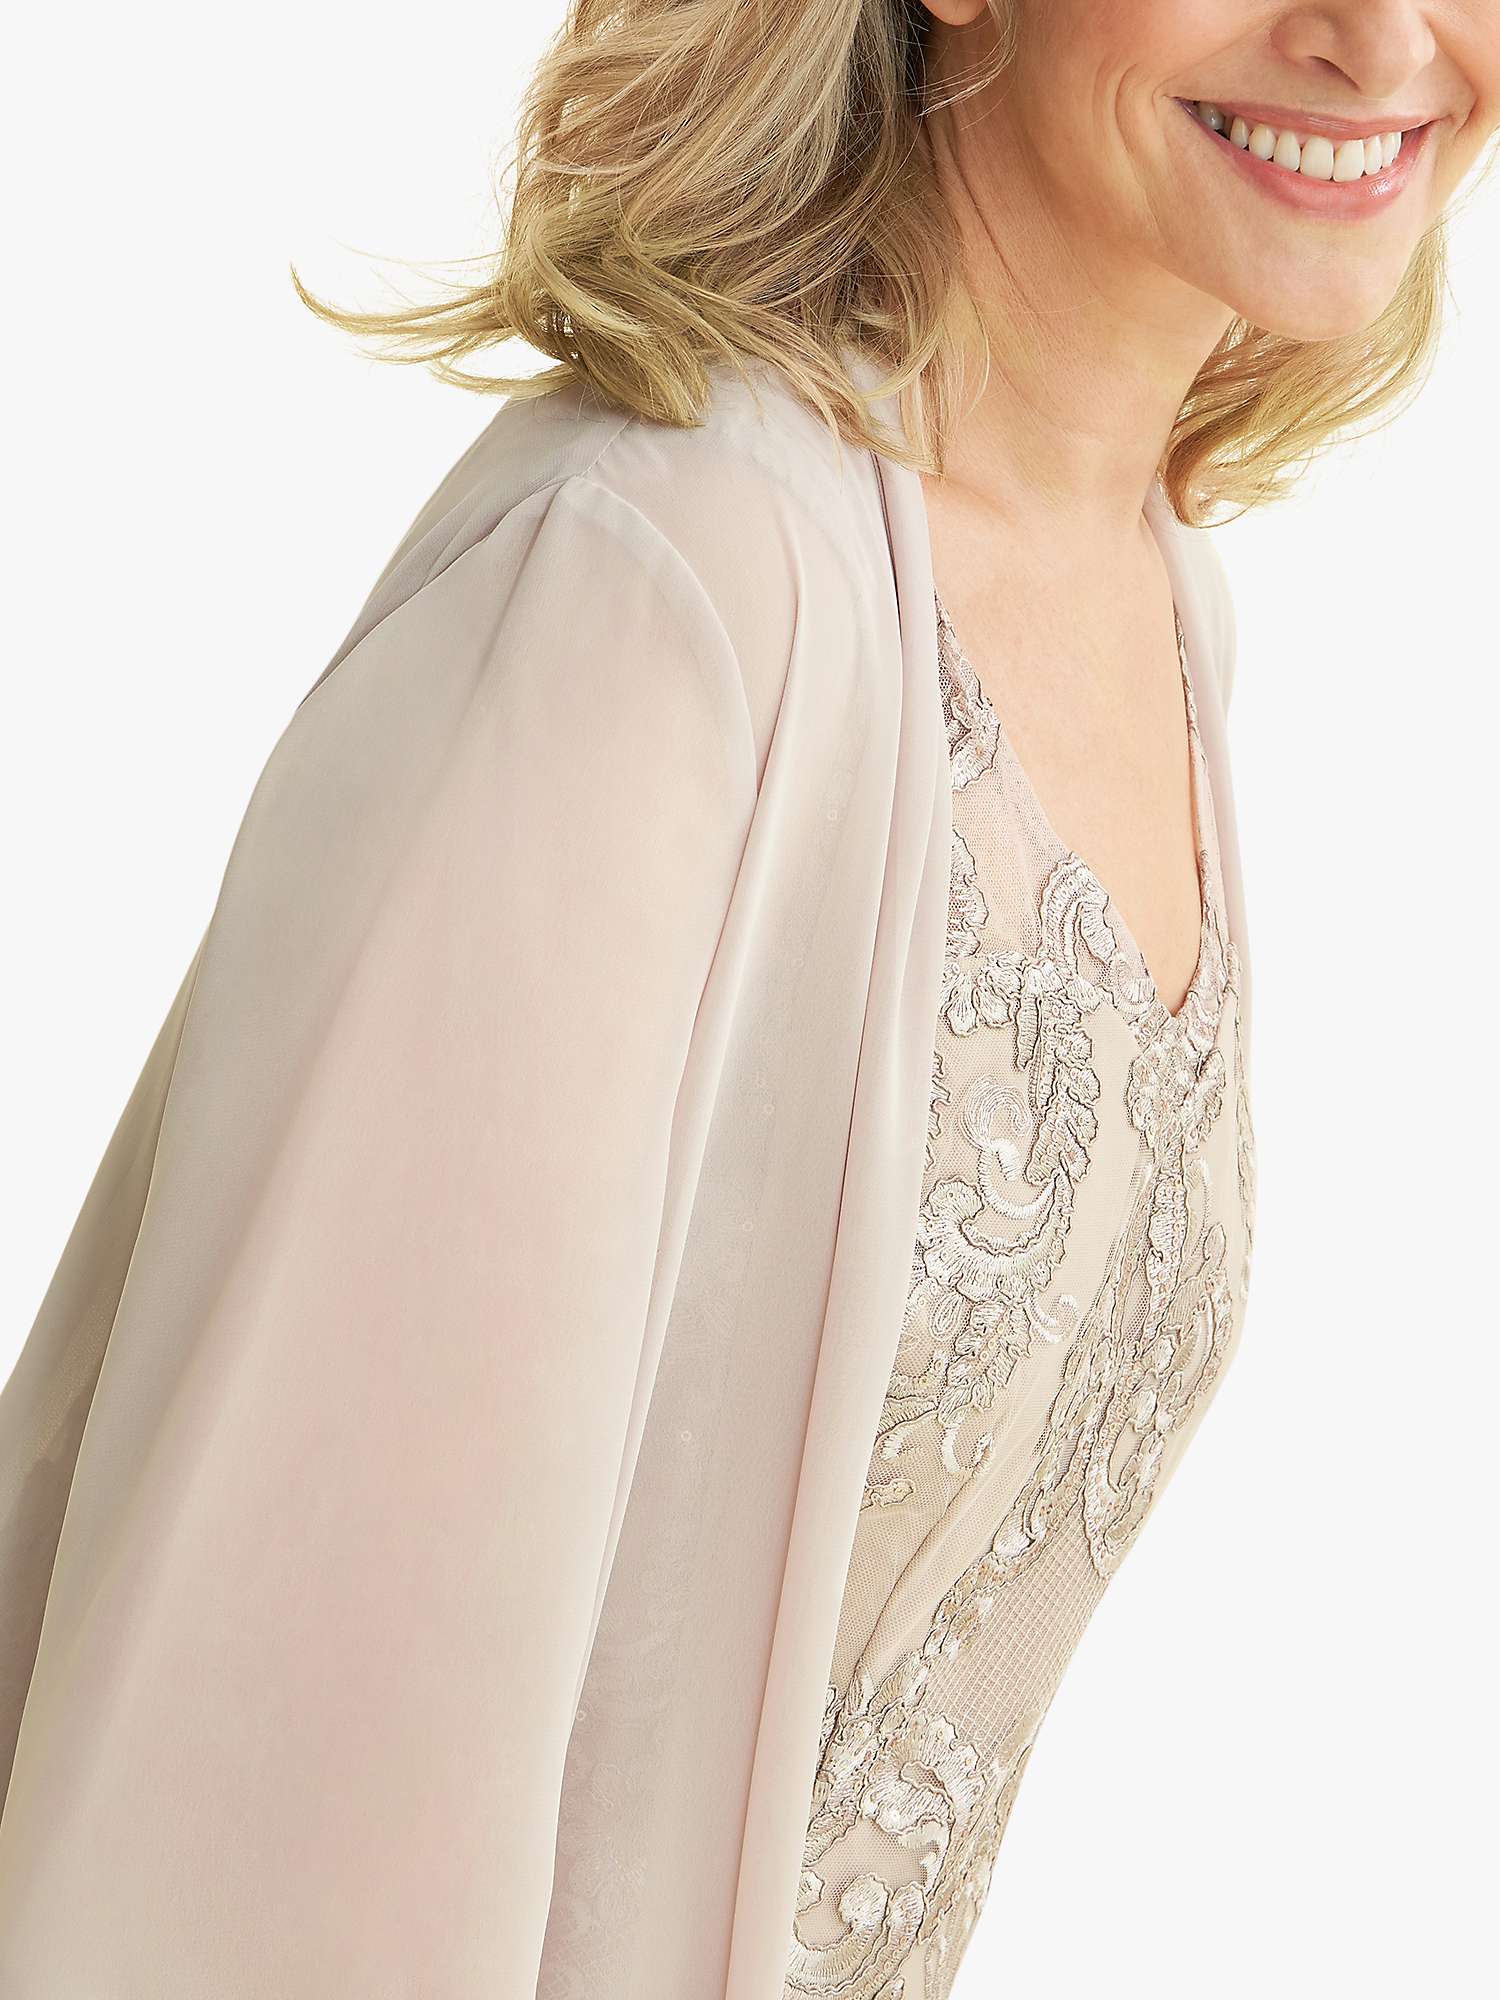 Buy Gina Bacconi Joss Metallic Embroidered Lace Dress with Chiffon Jacket, Taupe Online at johnlewis.com